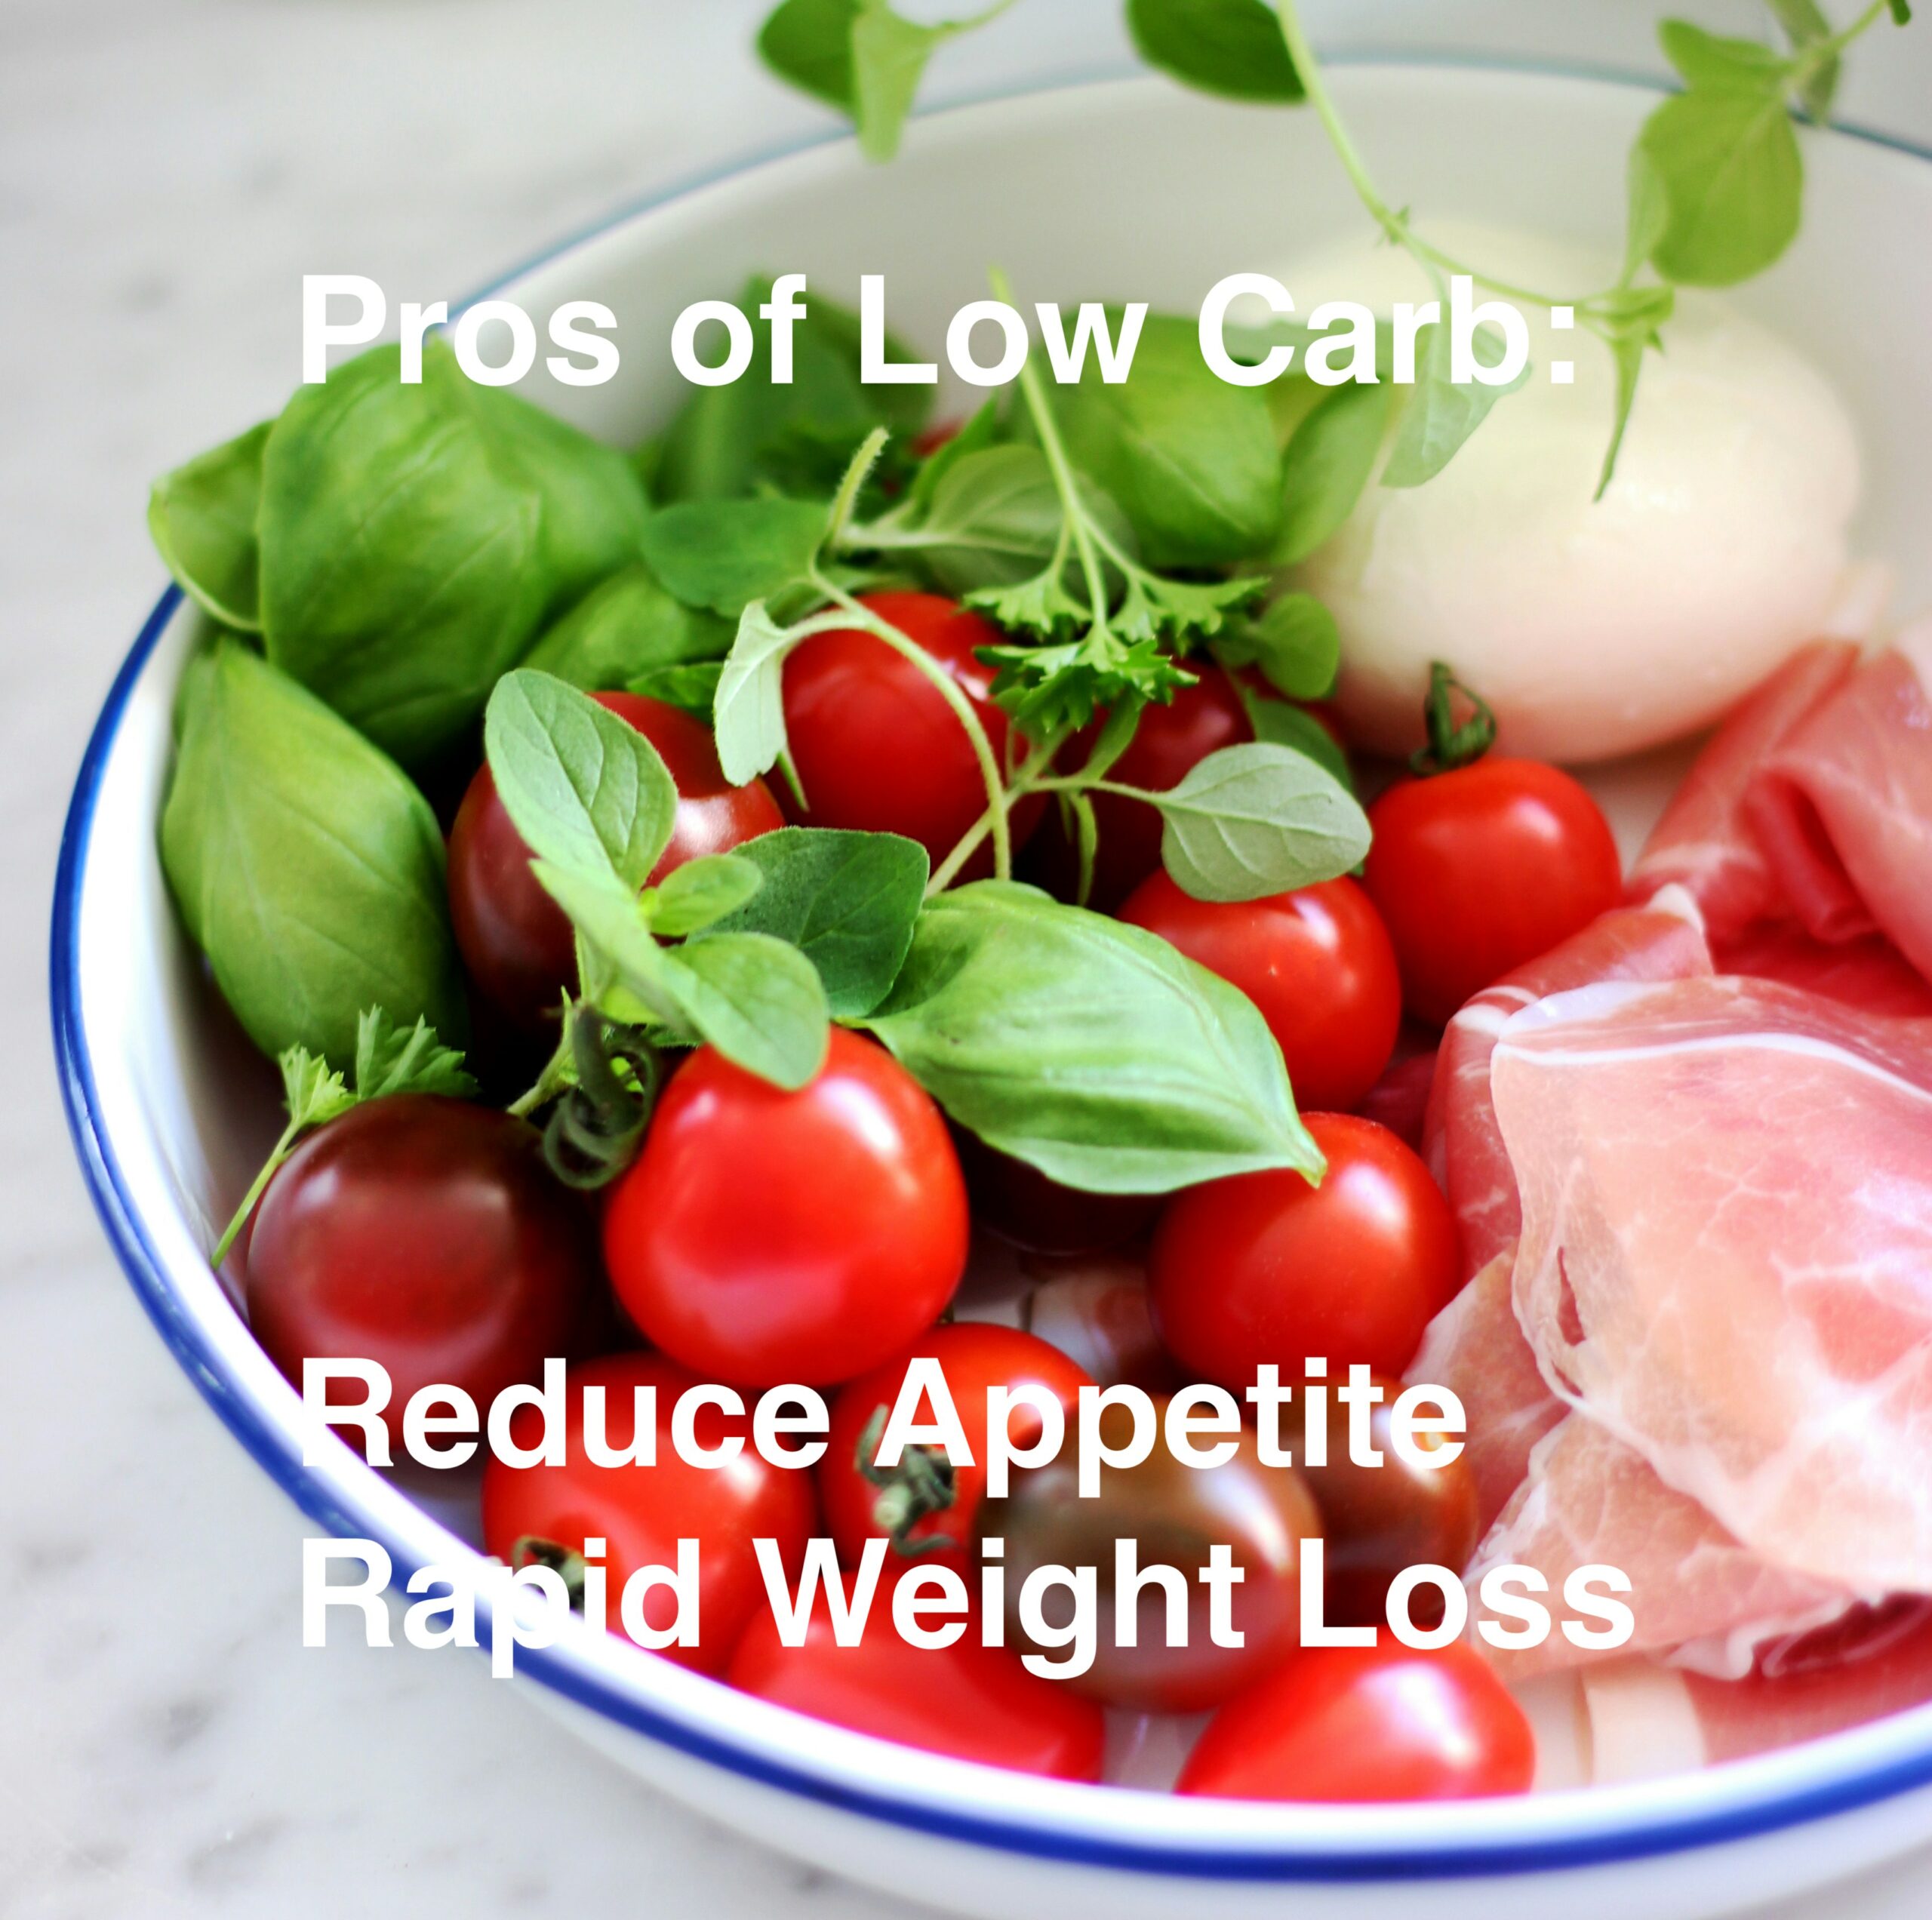 Pros of Low Carb/ Reduce Appetite and Rapid Weight Loss tomato salad and ham